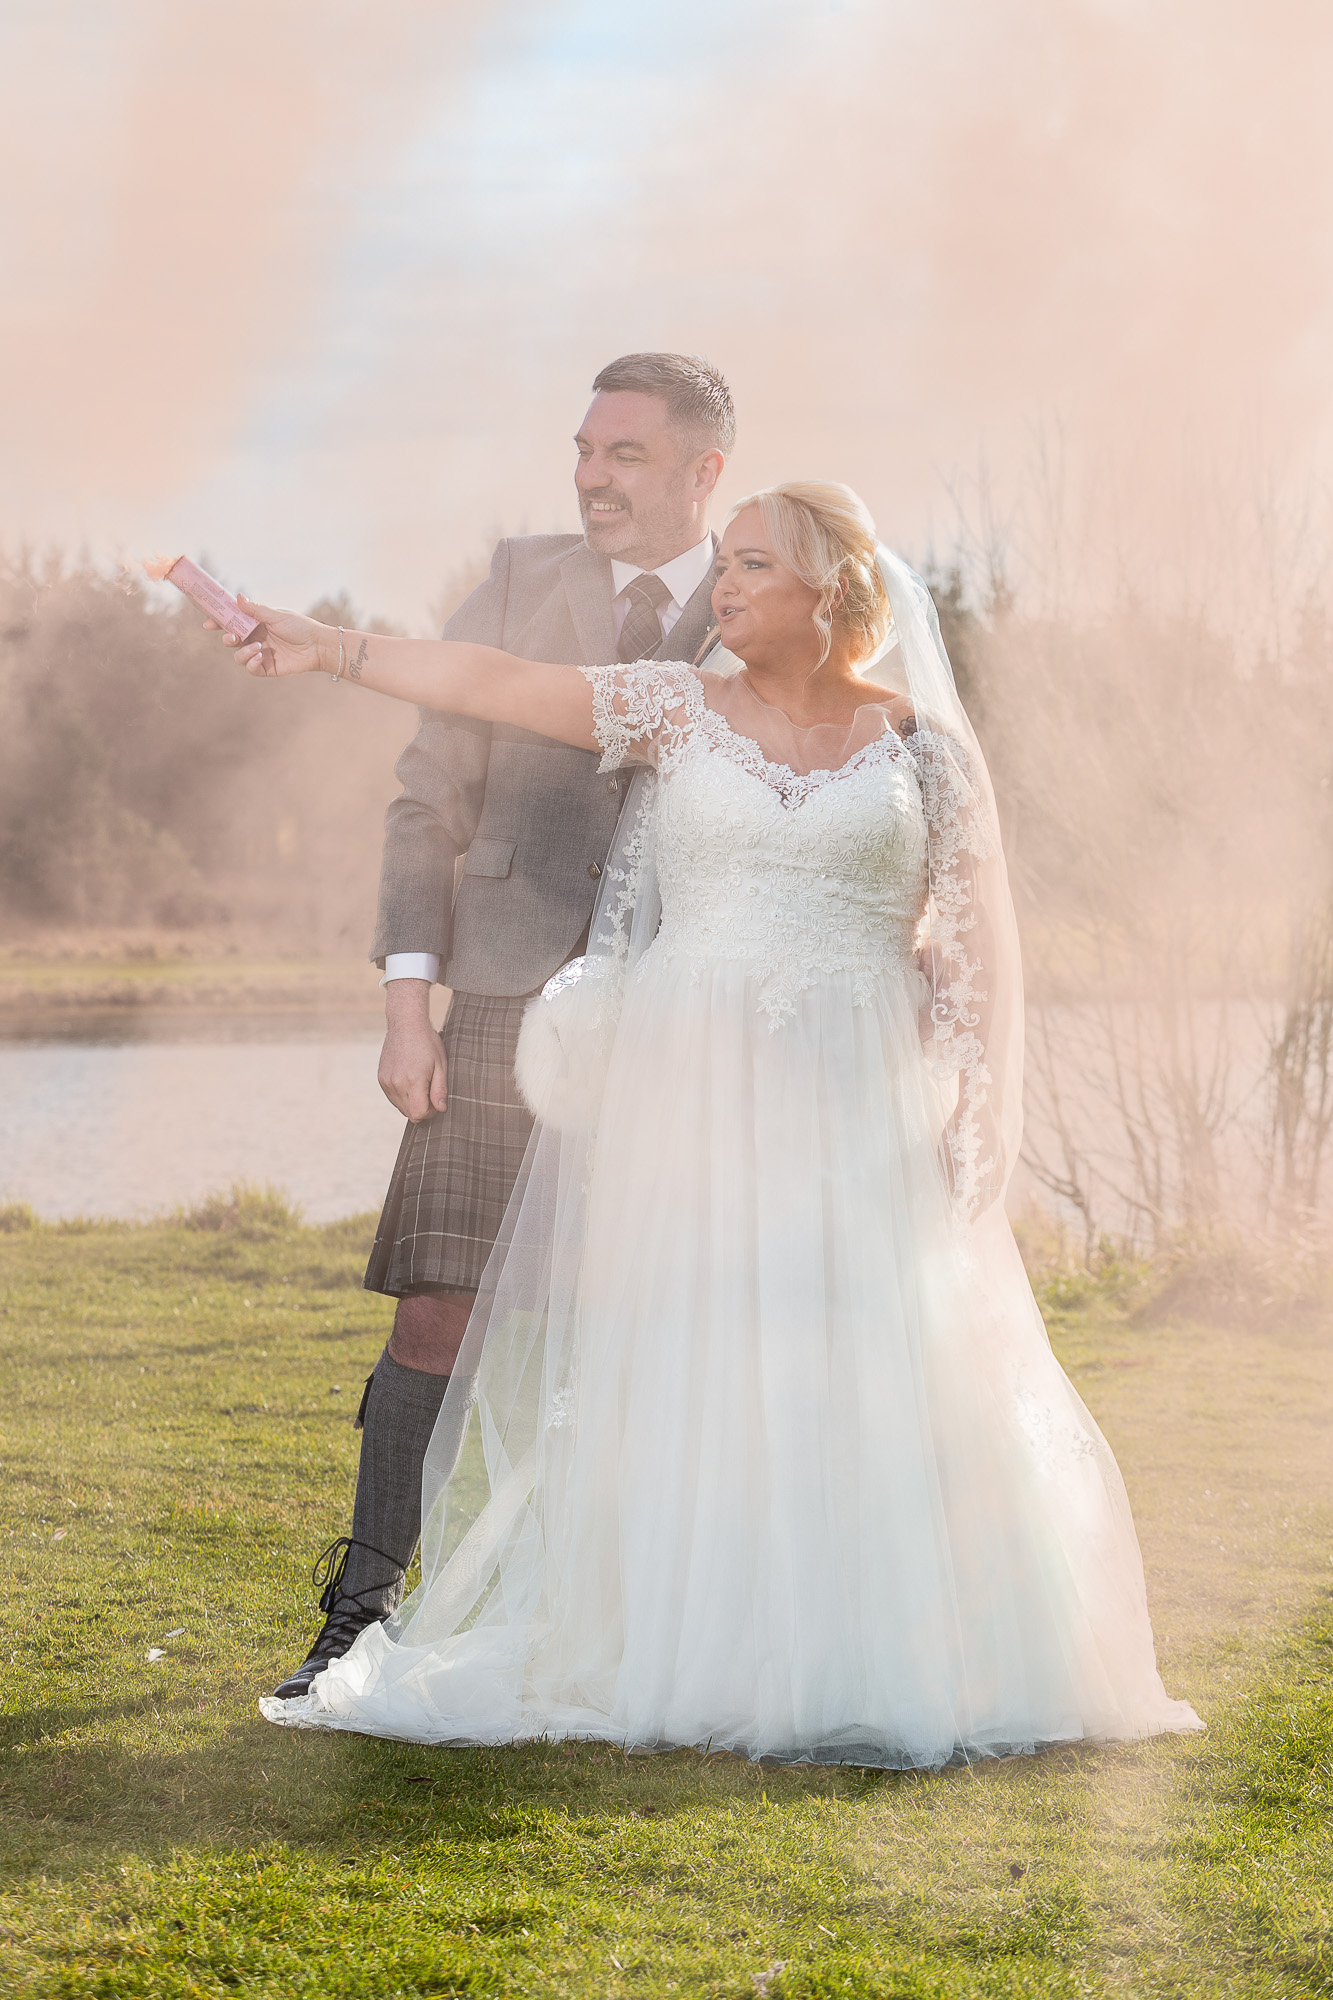 Colour image of a couple letting off a red flare, on the banks of a loch. The bride is at the front centre while the groom stands directly behind her, looking at her extended arm holding the red flare. both are happy.Wedding photographer Aberdeen, Picture by Scott Cameron Baxter.